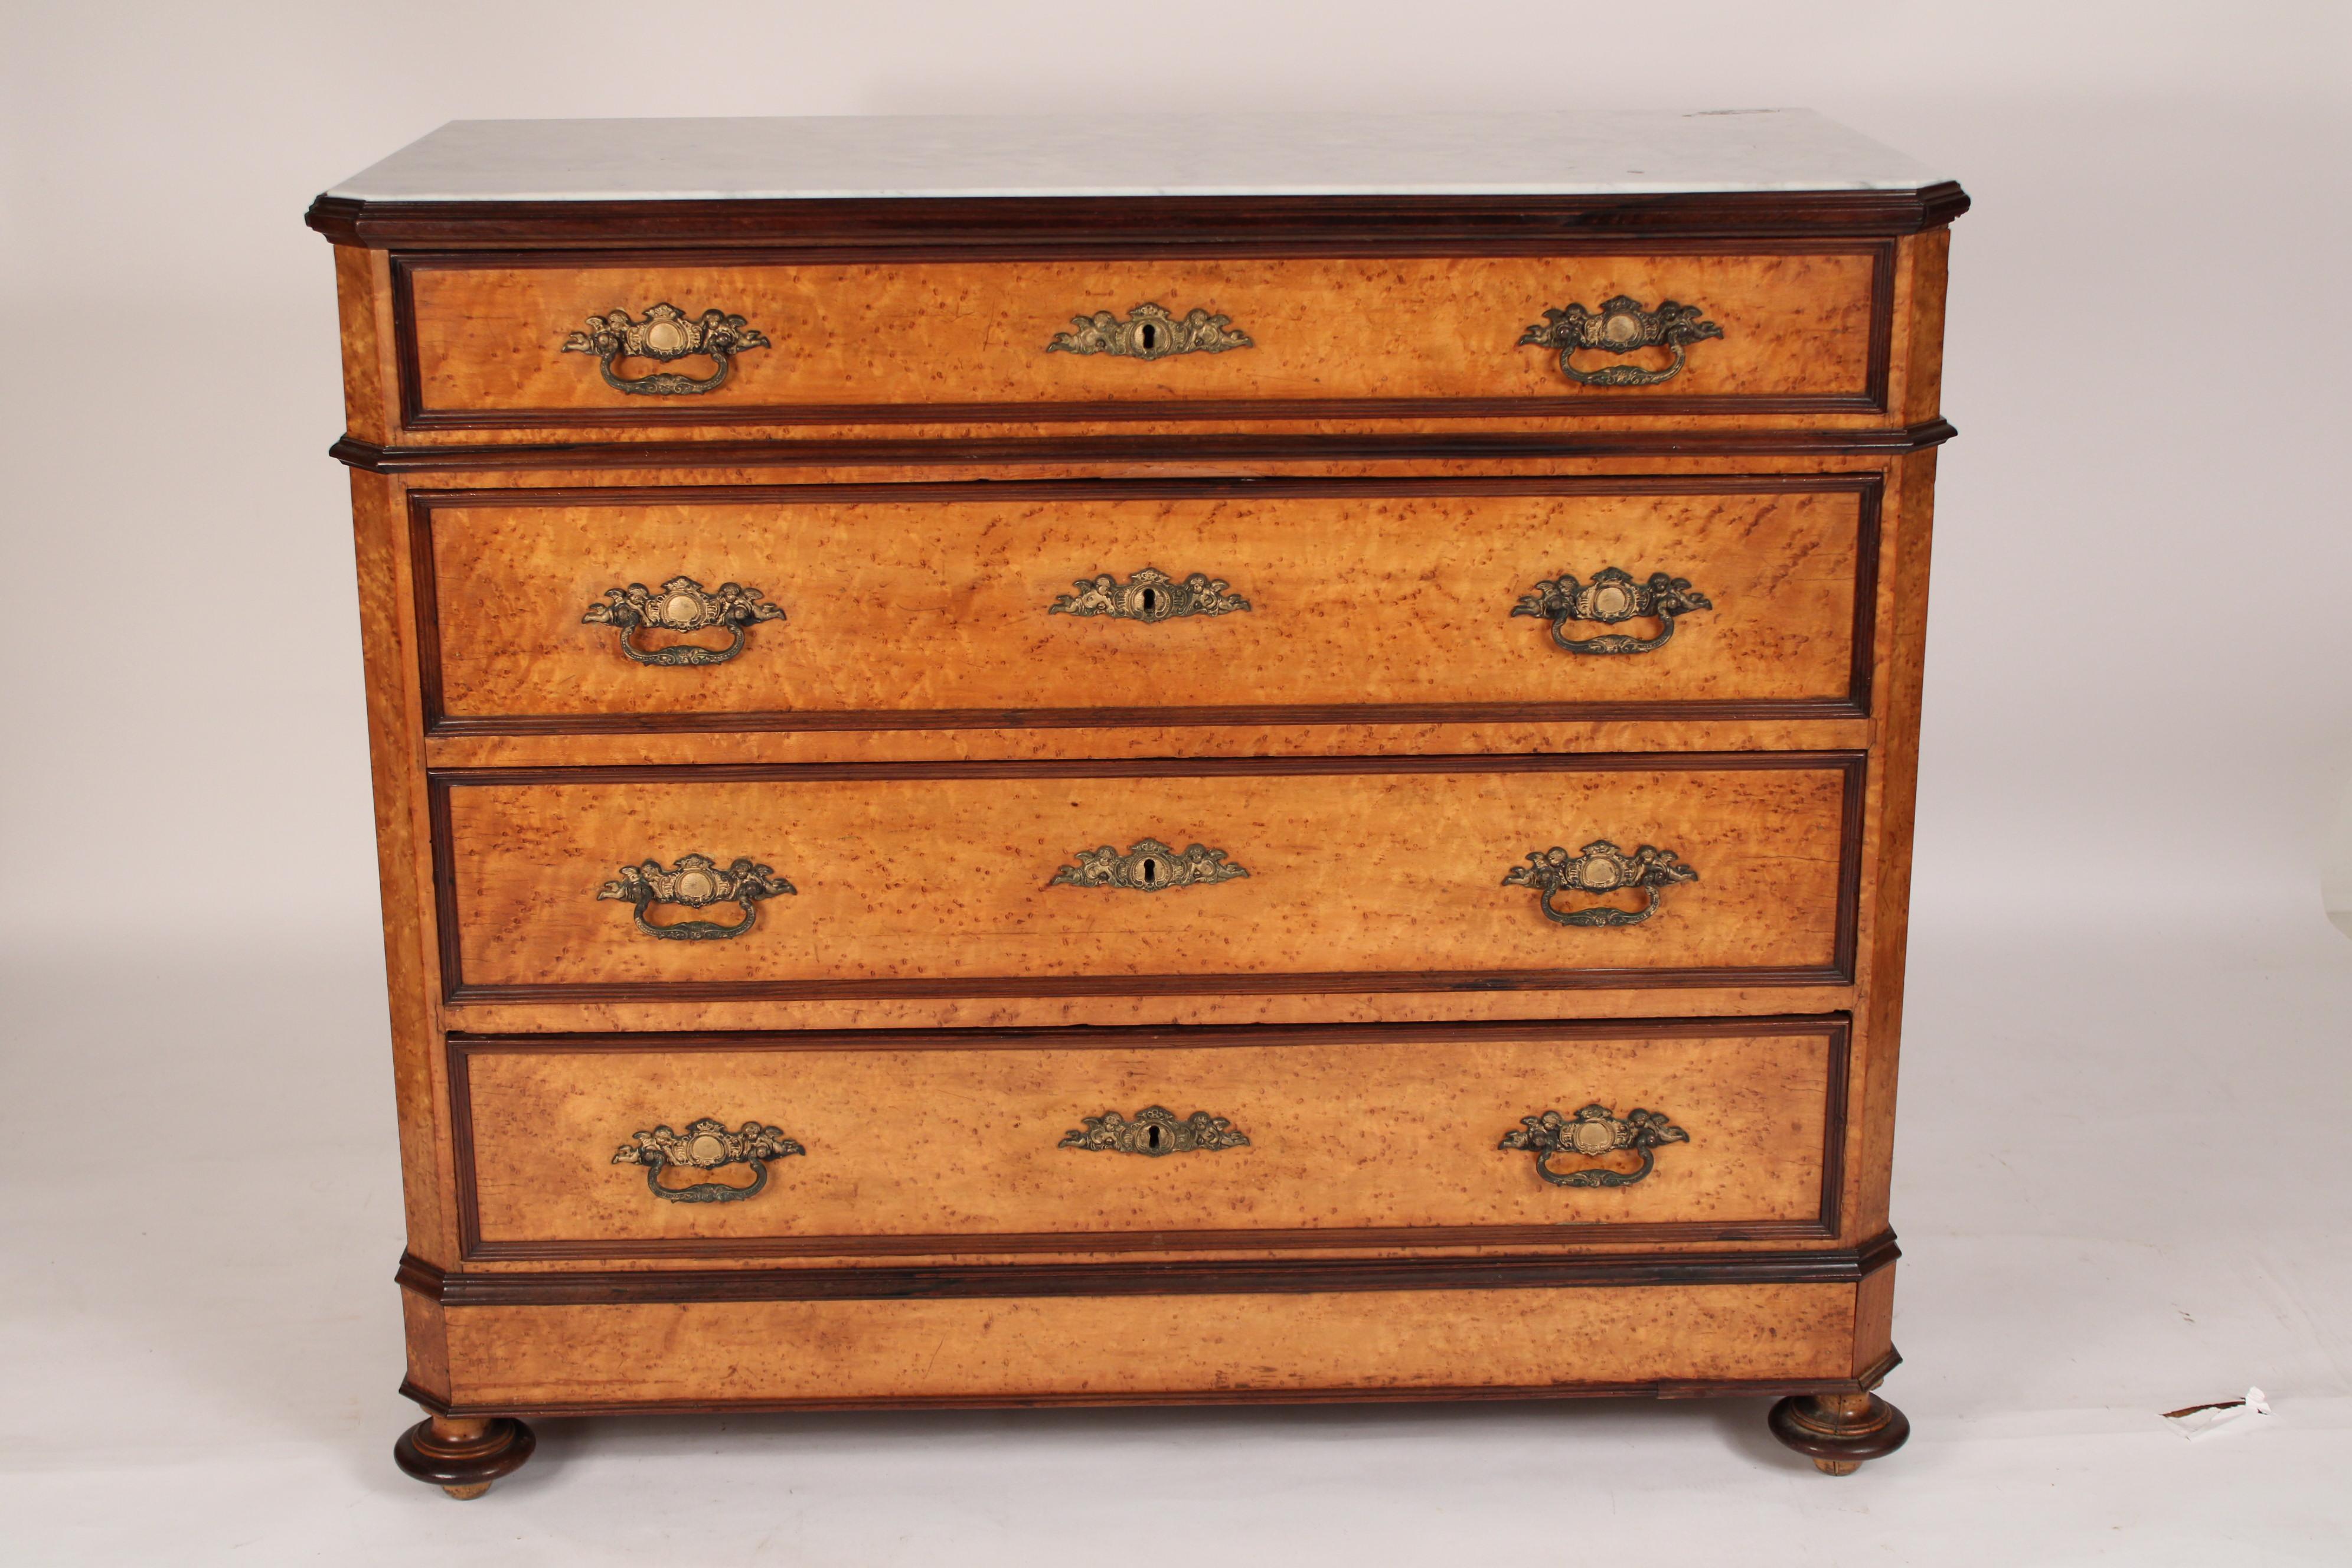 Napoleon III birdseye maple chest of drawers with marble top, circa 1870. With an inset white Carrera marble top with canted corners bordered with mahogany moldings, 4 birdseye maple drawers with mahogany molded borders and bronze drawer pulls and